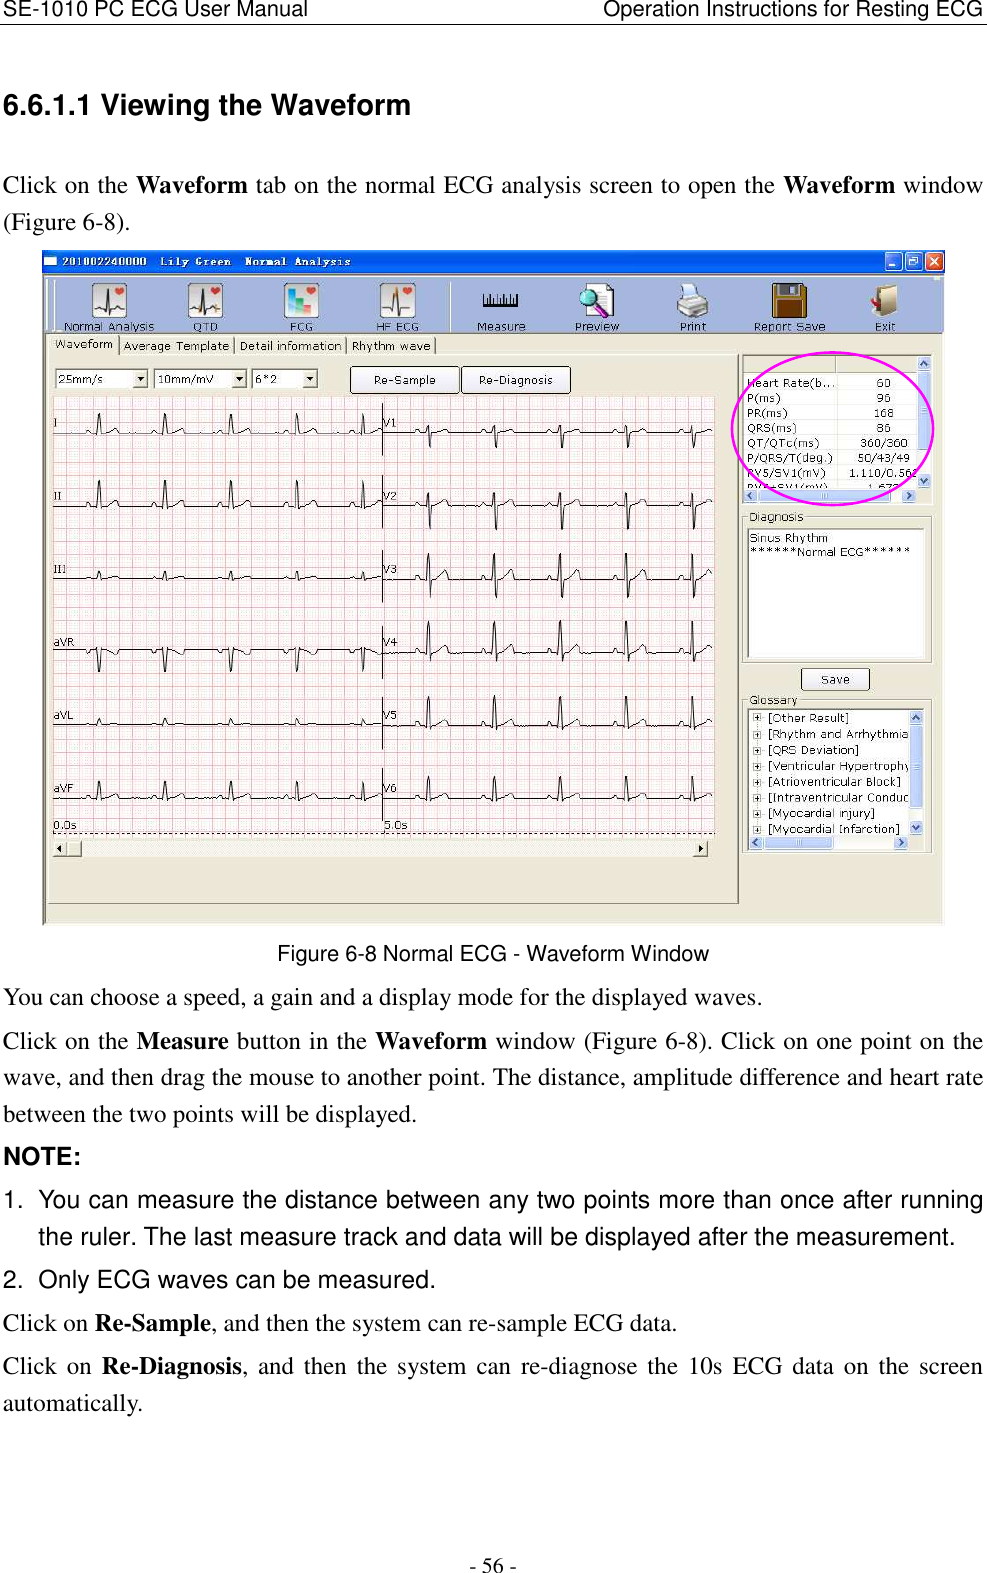 SE-1010 PC ECG User Manual                                                      Operation Instructions for Resting ECG - 56 - 6.6.1.1 Viewing the Waveform Click on the Waveform tab on the normal ECG analysis screen to open the Waveform window (Figure 6-8).  Figure 6-8 Normal ECG - Waveform Window You can choose a speed, a gain and a display mode for the displayed waves. Click on the Measure button in the Waveform window (Figure 6-8). Click on one point on the wave, and then drag the mouse to another point. The distance, amplitude difference and heart rate between the two points will be displayed. NOTE: 1.  You can measure the distance between any two points more than once after running the ruler. The last measure track and data will be displayed after the measurement. 2.  Only ECG waves can be measured. Click on Re-Sample, and then the system can re-sample ECG data. Click on Re-Diagnosis, and then the system can re-diagnose the 10s ECG data on the screen automatically. 